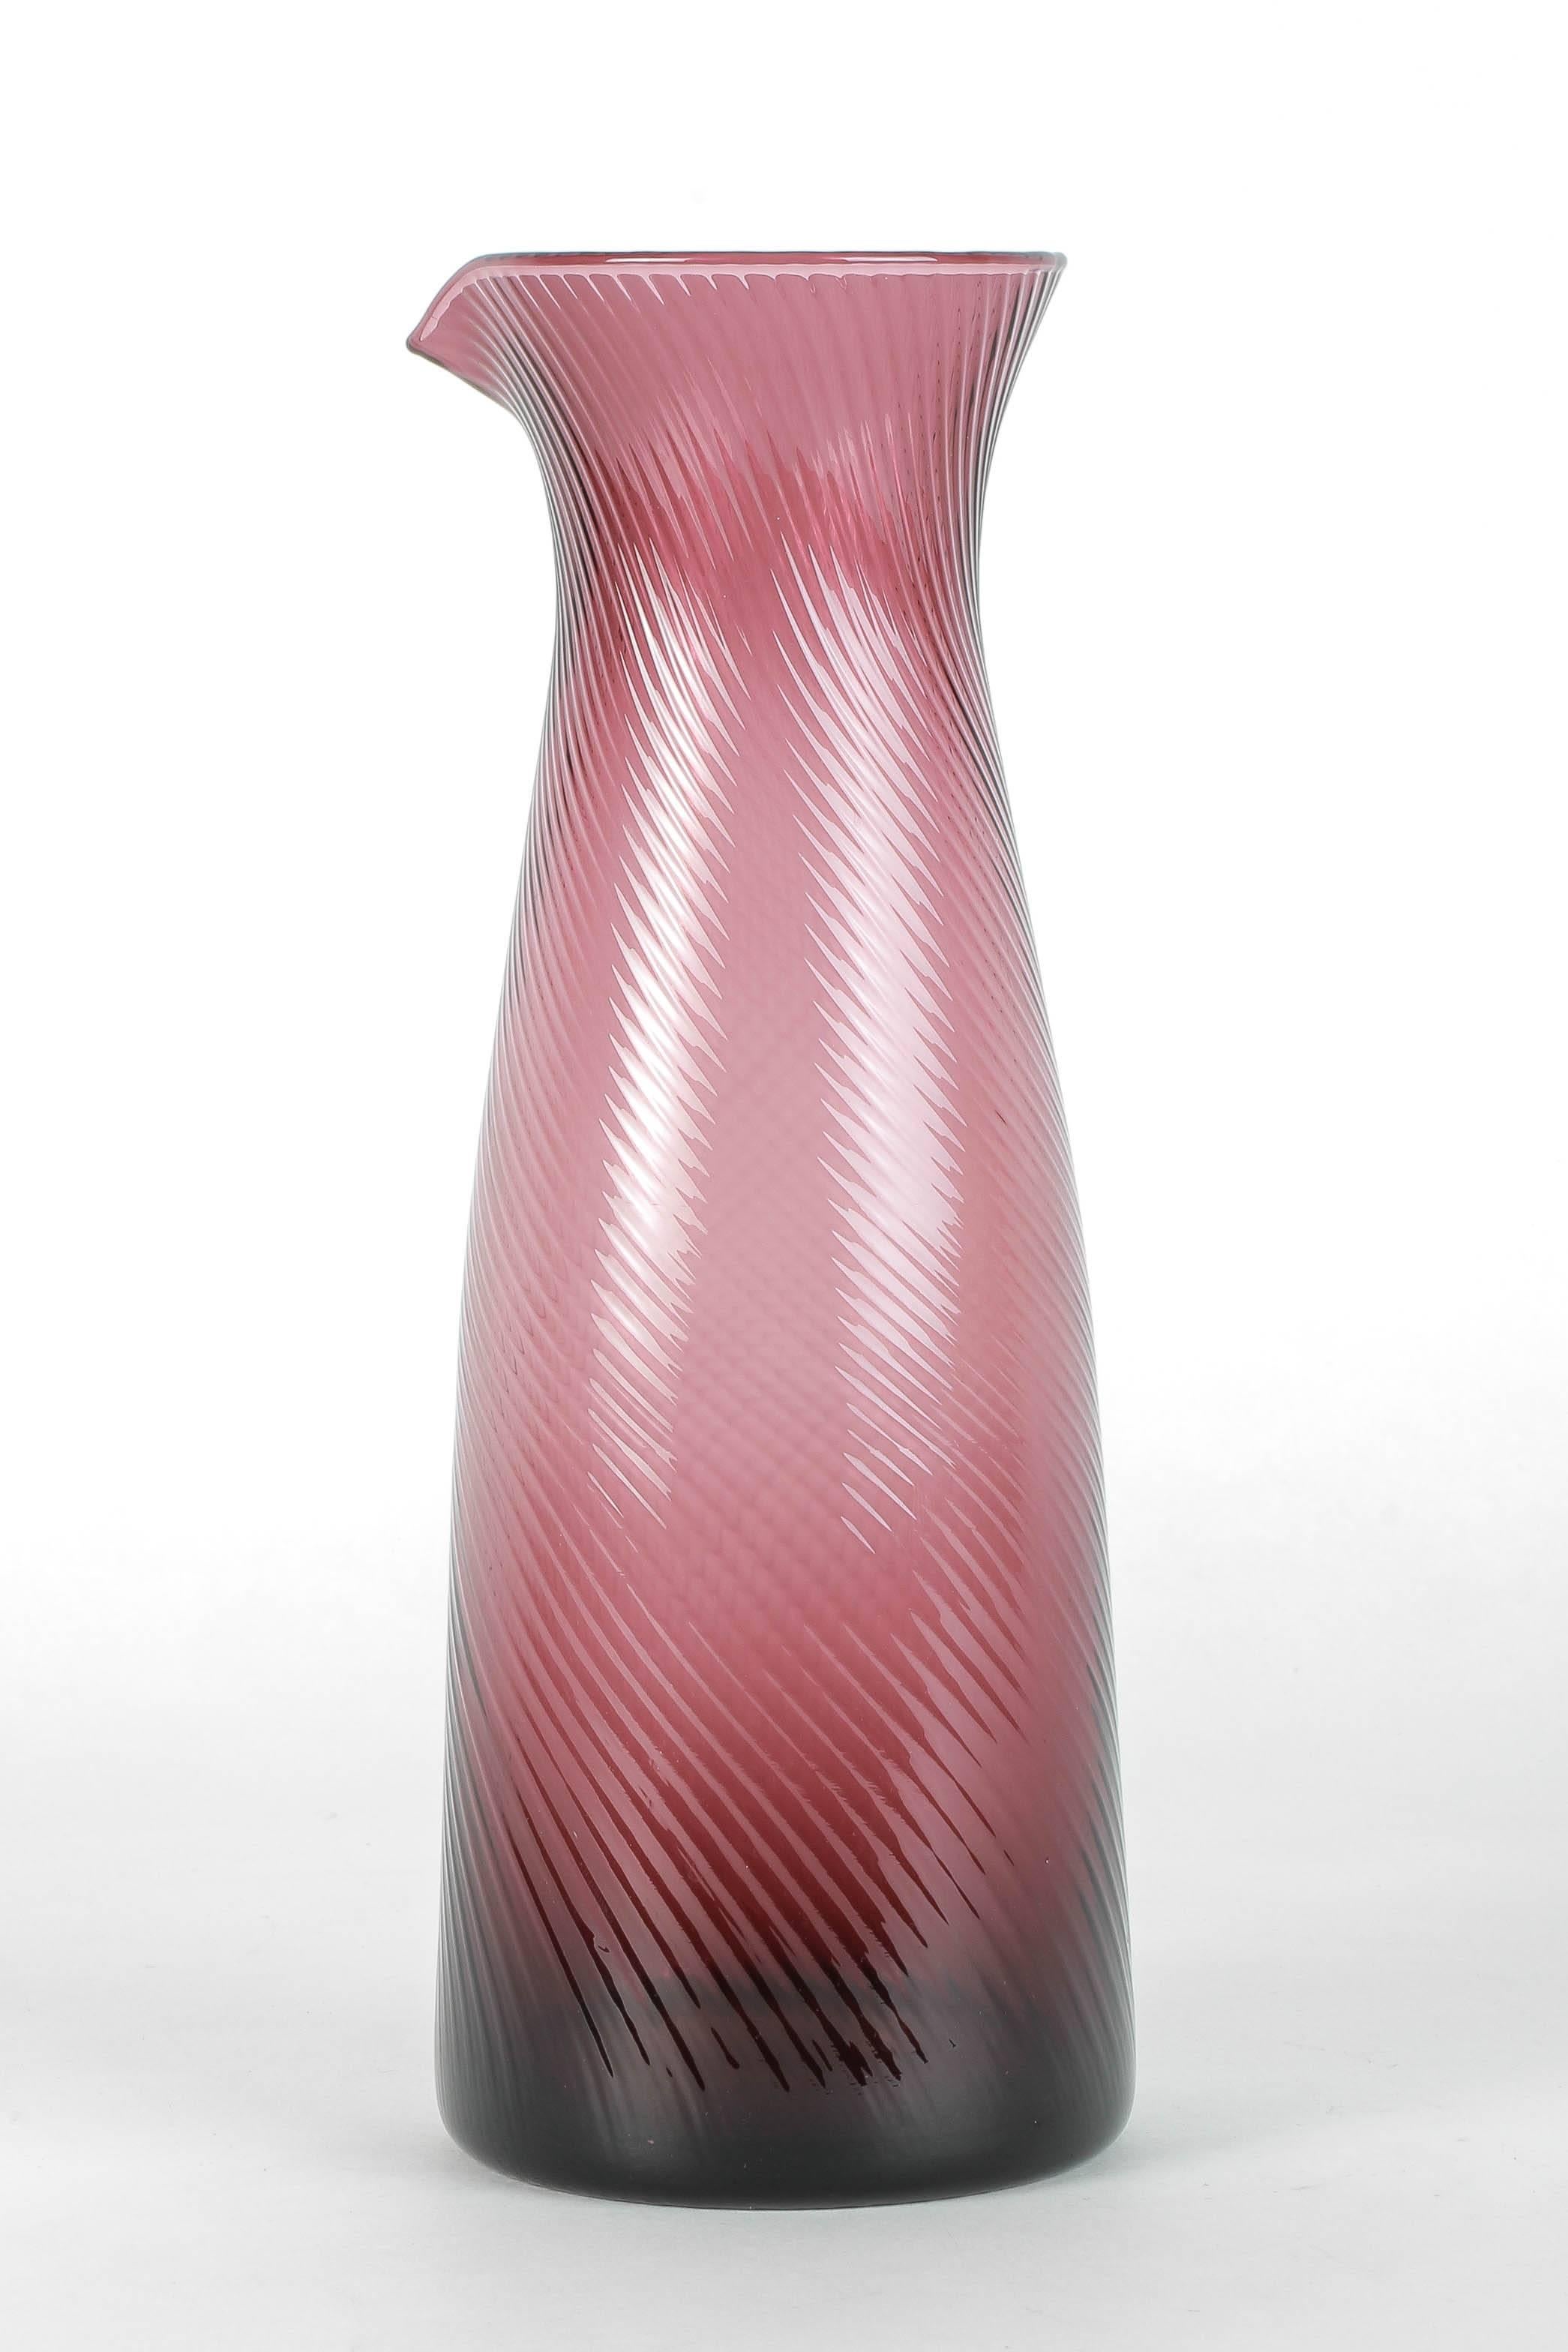 Wonderful Italian glass pitcher with a ribbed textured surface, stunning violet color manufactured in Venice in the 1950s.